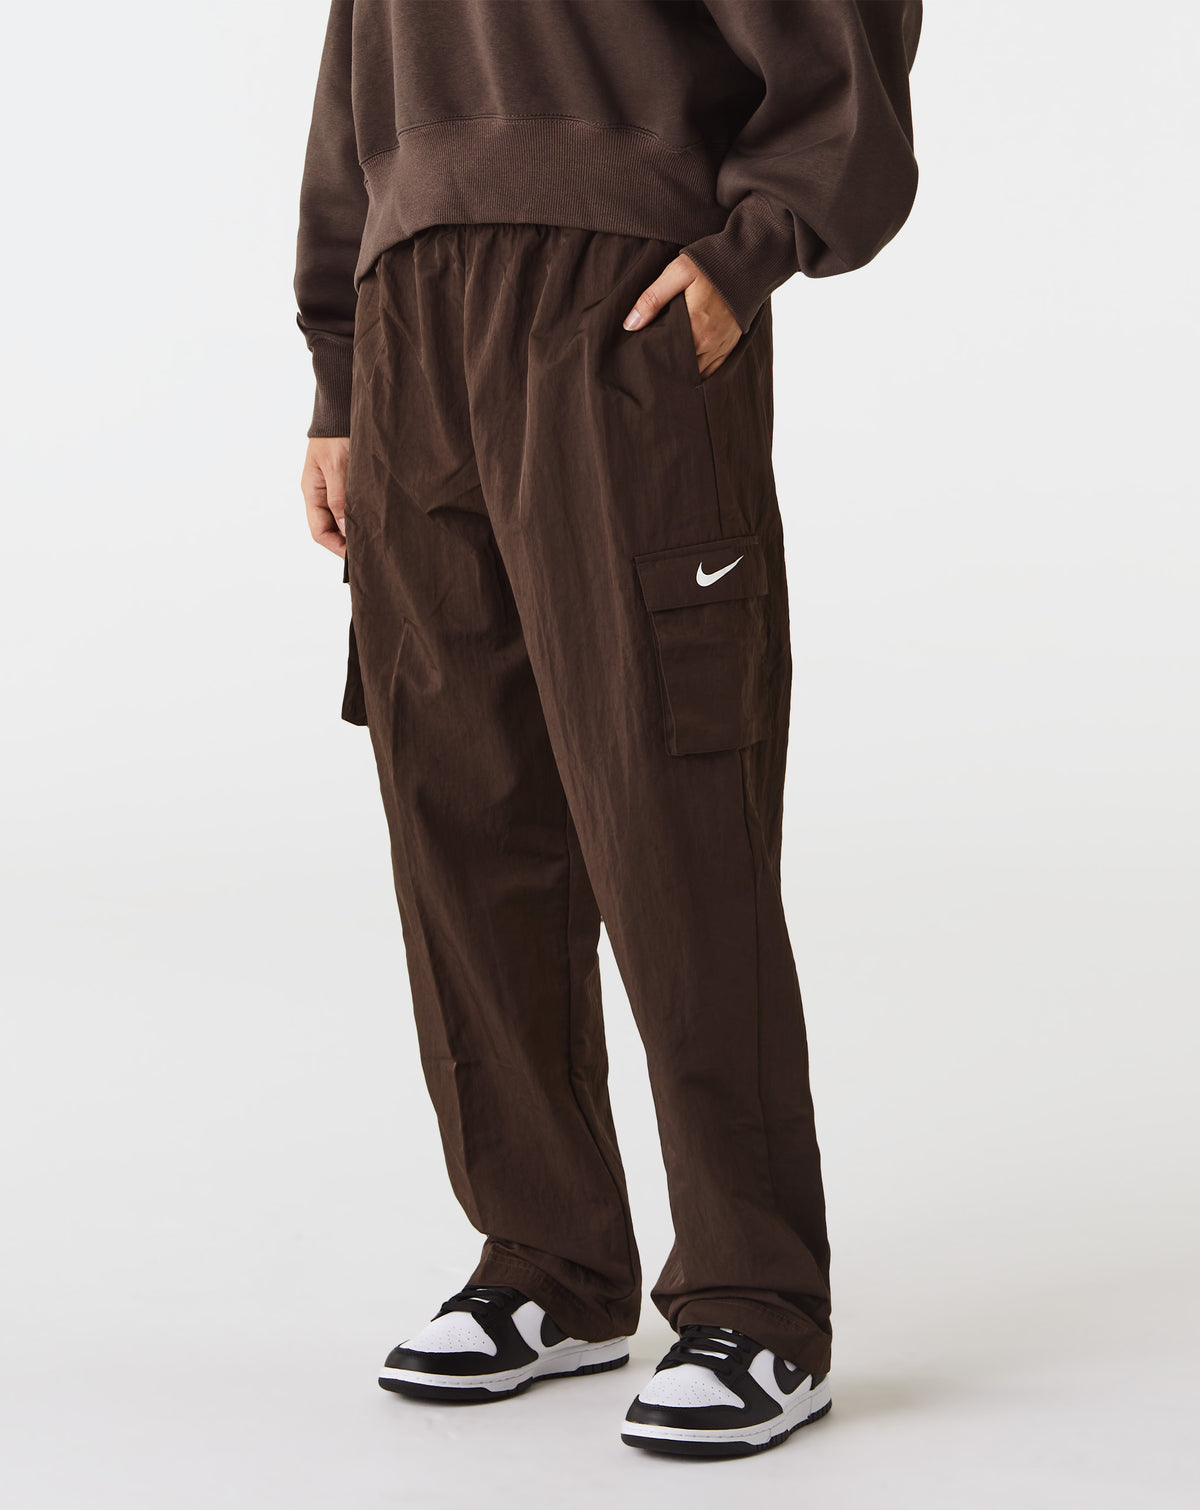 Nike Women's High-Rise Woven Cargo Pants - Rule of Next Apparel